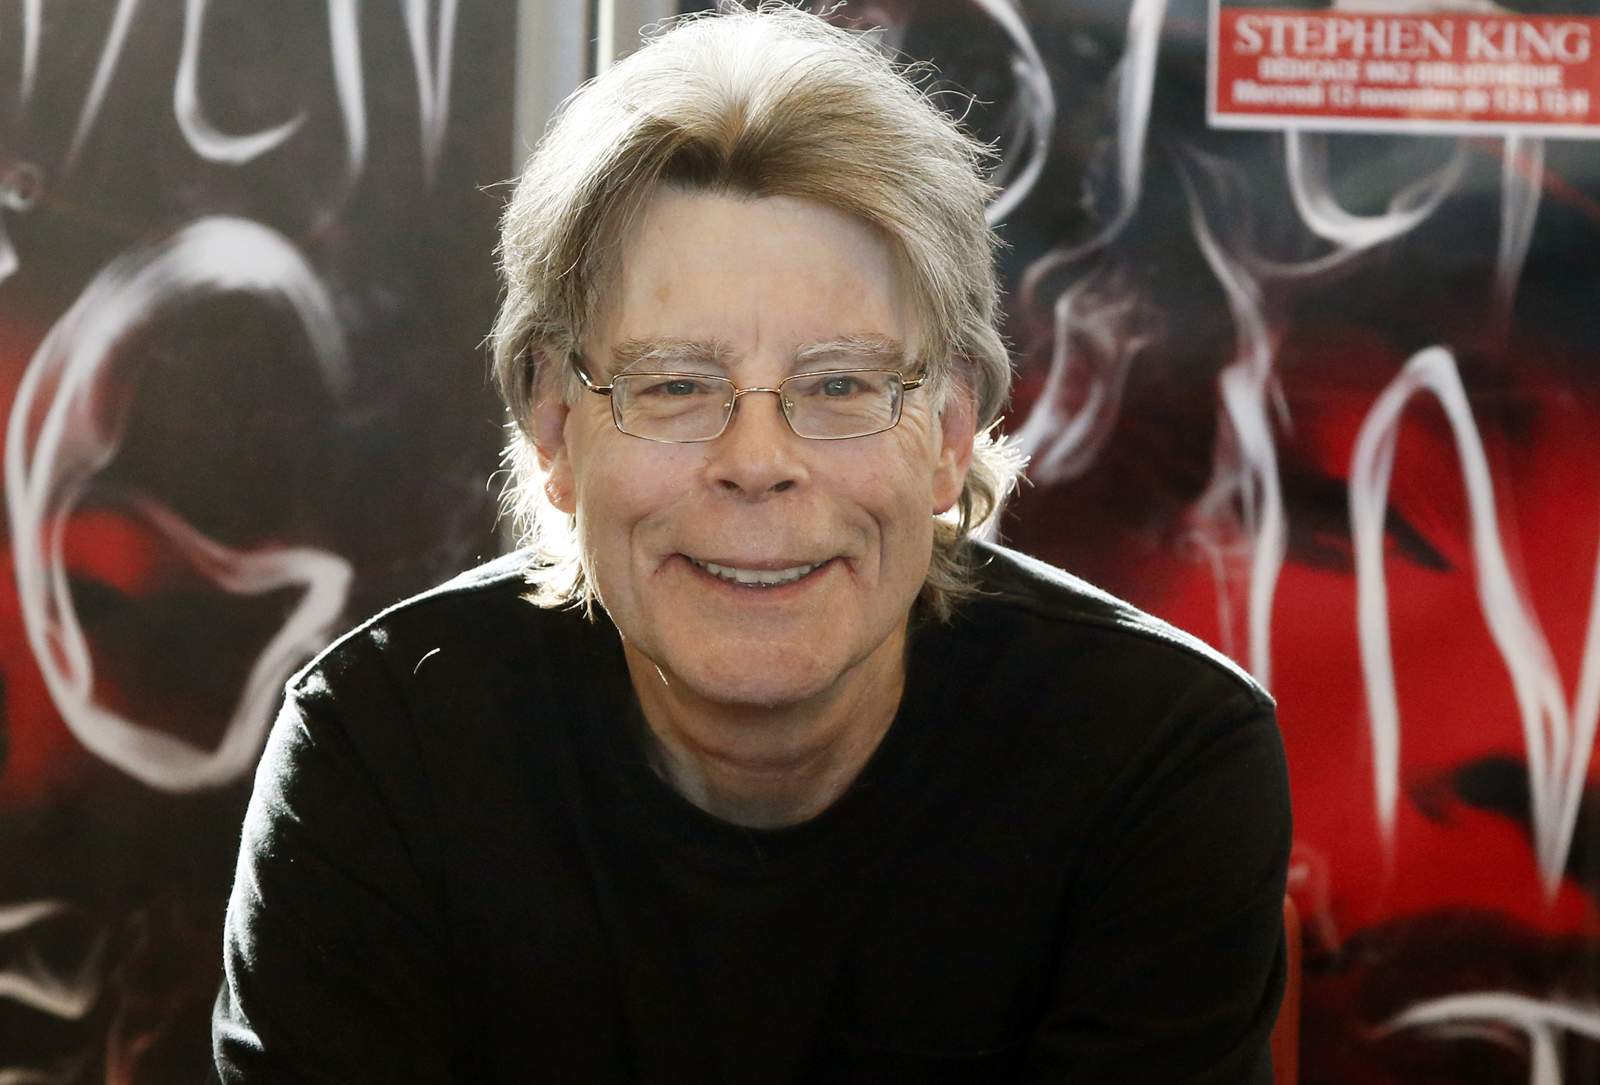 Quotes from Stephen King interview with The Associated Press